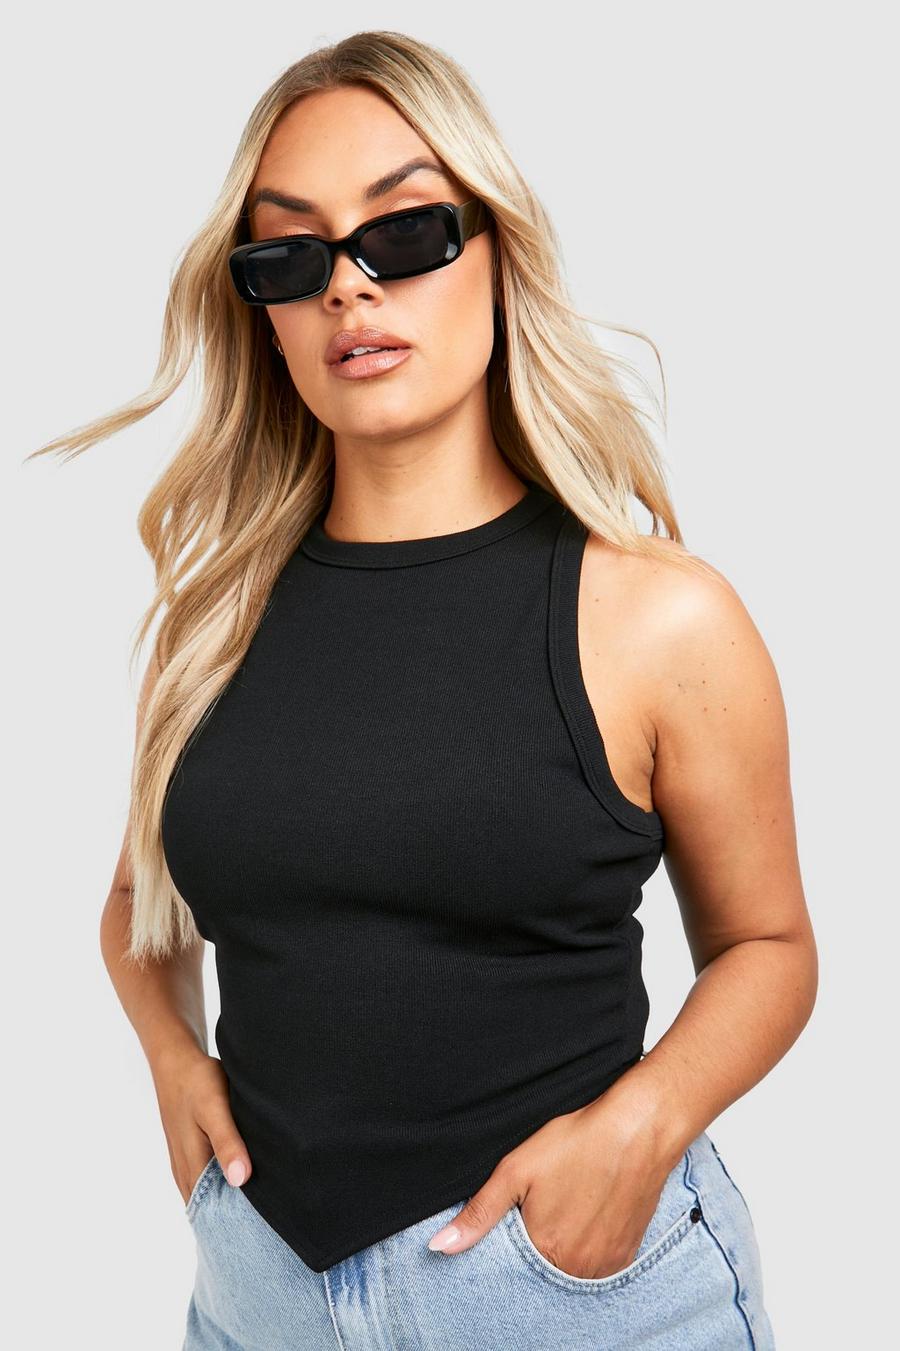 TIYOMI Plus Size Zip Tank Tops for Women Summer Black Camisoles V Neck Camisole  XL 14W 16W at  Women's Clothing store